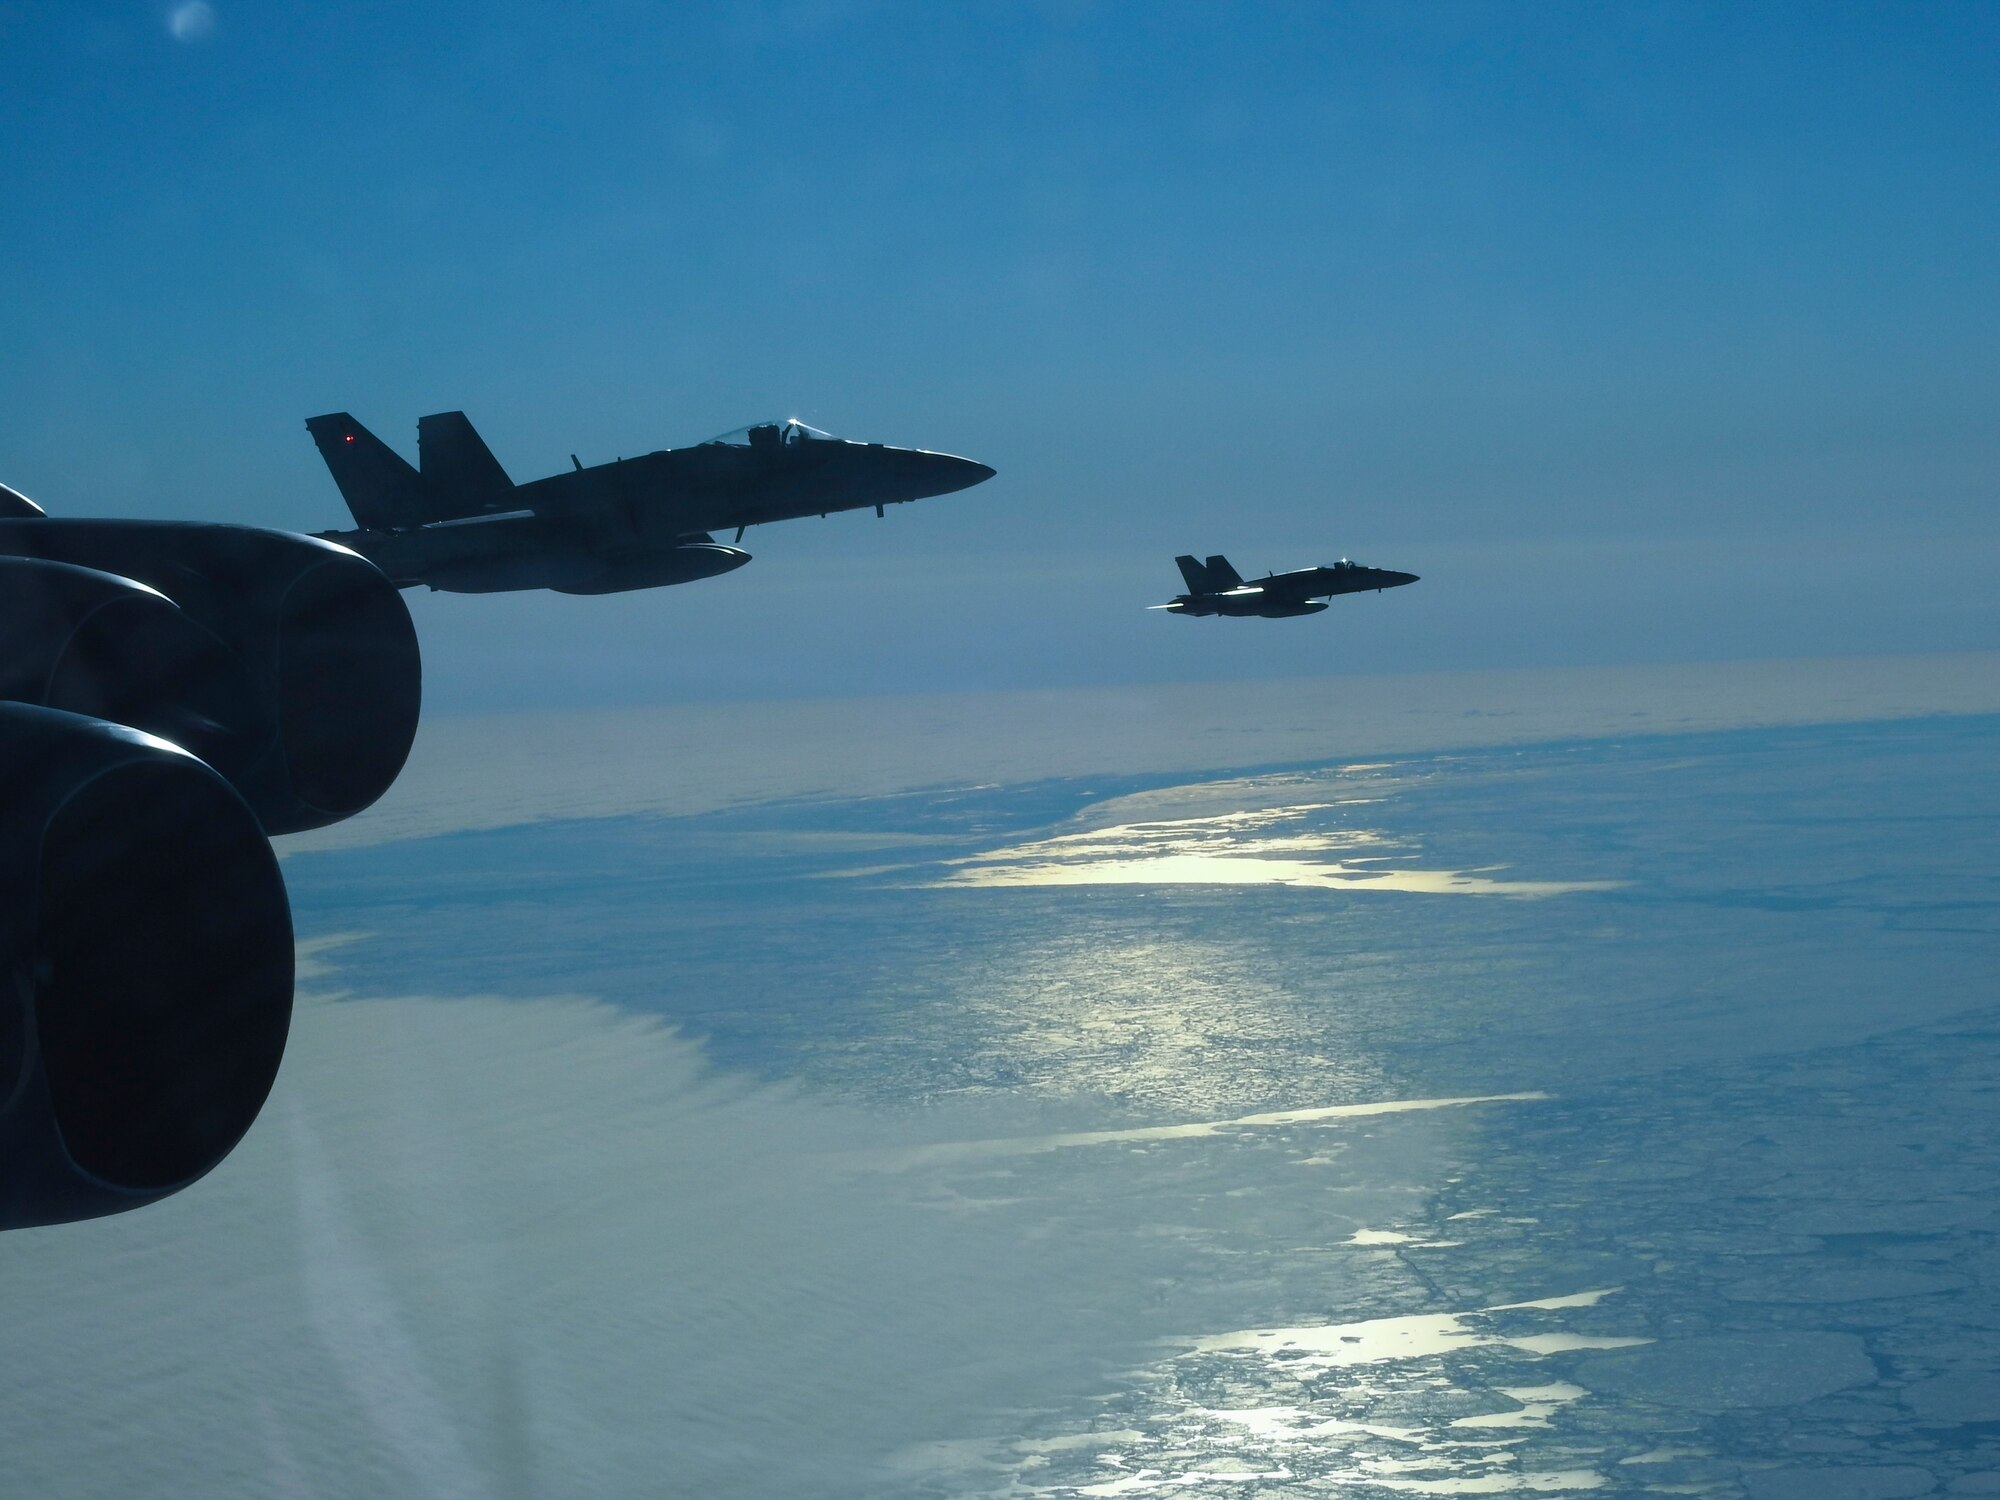 A Royal Canadian Air Force CF-18 Hornet, assigned to the Royal Canadian Air Force, escorts a B-52 Stratofortress during a North American Aerospace Defense Command (NORAD) mission, June 14, 2020. NORAD routinely conducts intercept training in support of its mission to protect the sovereign airspaces of the United States and Canada. (Courtesy Photo)